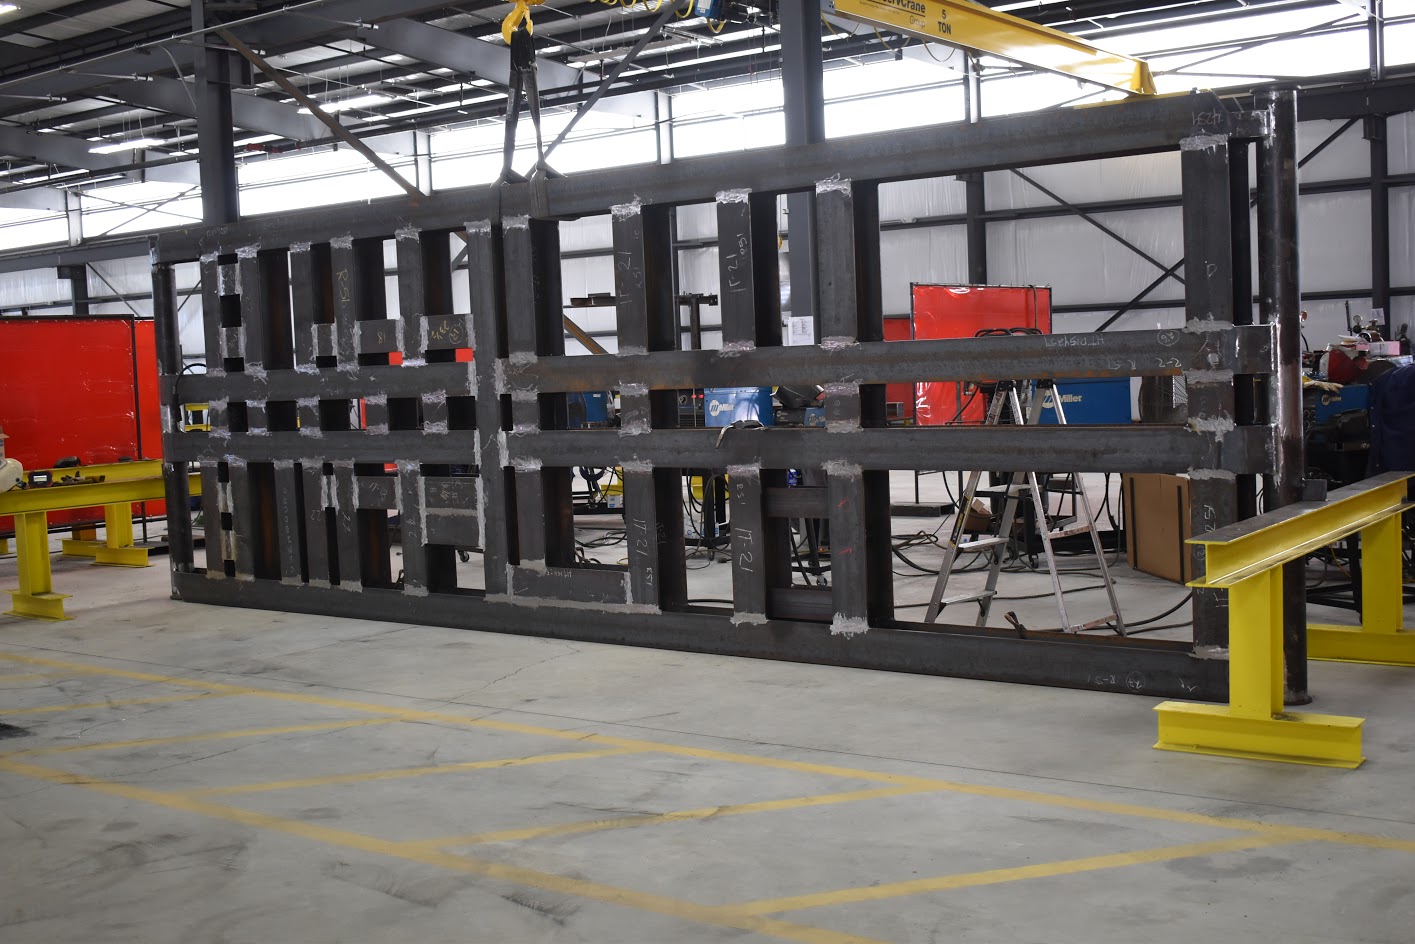 Steel support systems being manufactured